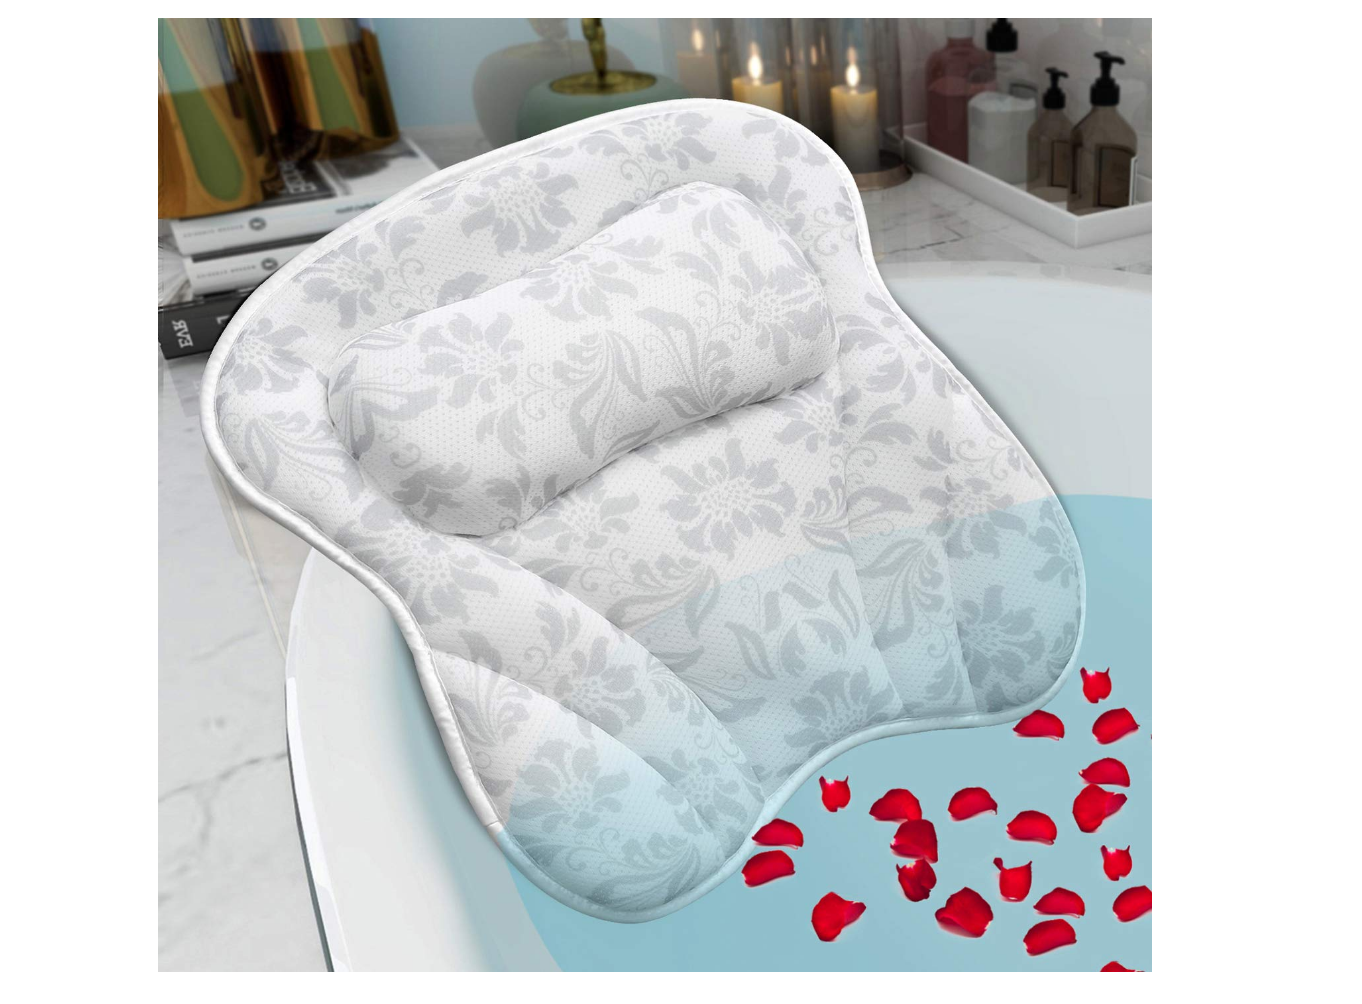 15 Best Bath Pillows Trending in 2023 (Buying Guide Included)